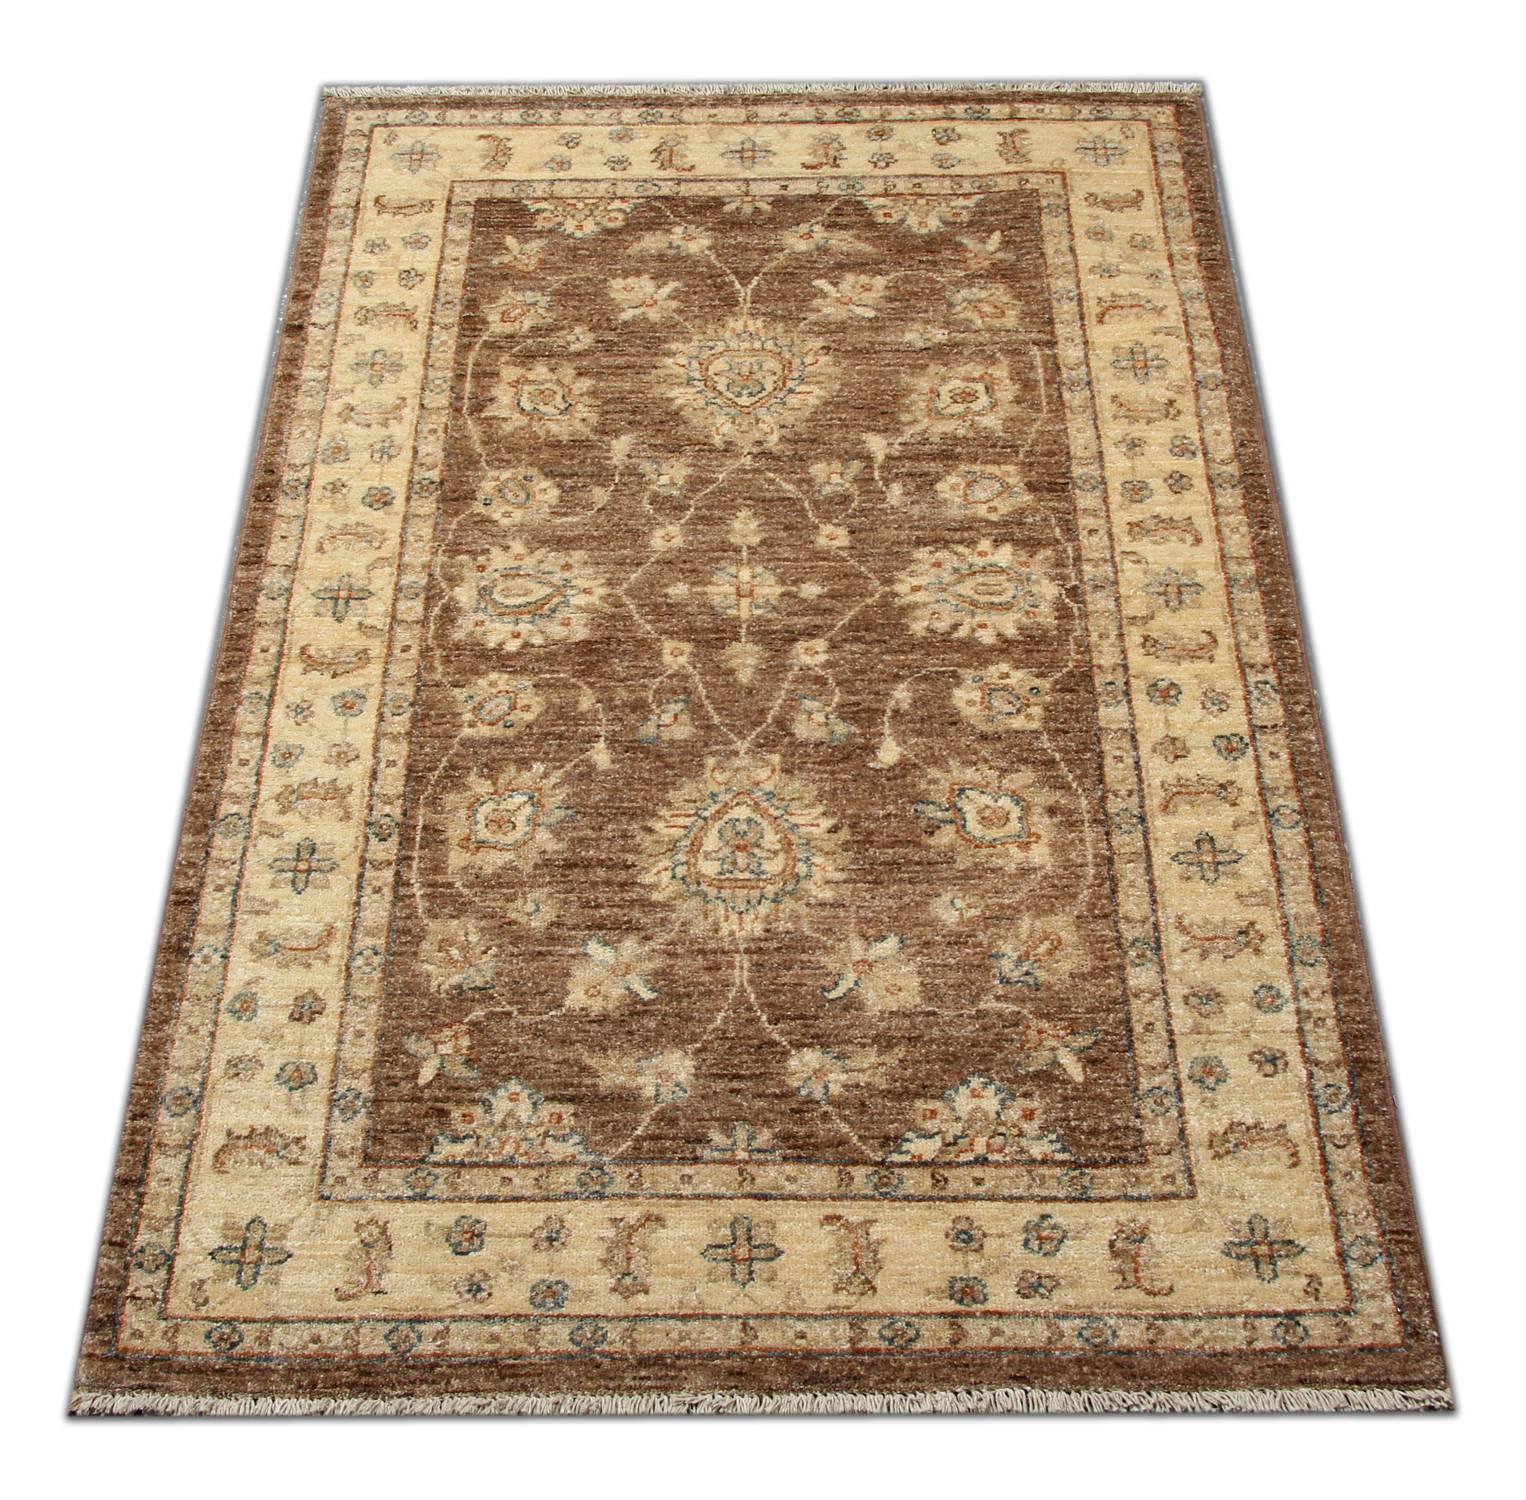 This rug is an example of handmade rugs in Afghanistan by skilled weavers. Handspun wool is used with natural dyes then the rug is professionally washed and finished. These traditional rugs are kind of our luxury rugs made of our own looms by our